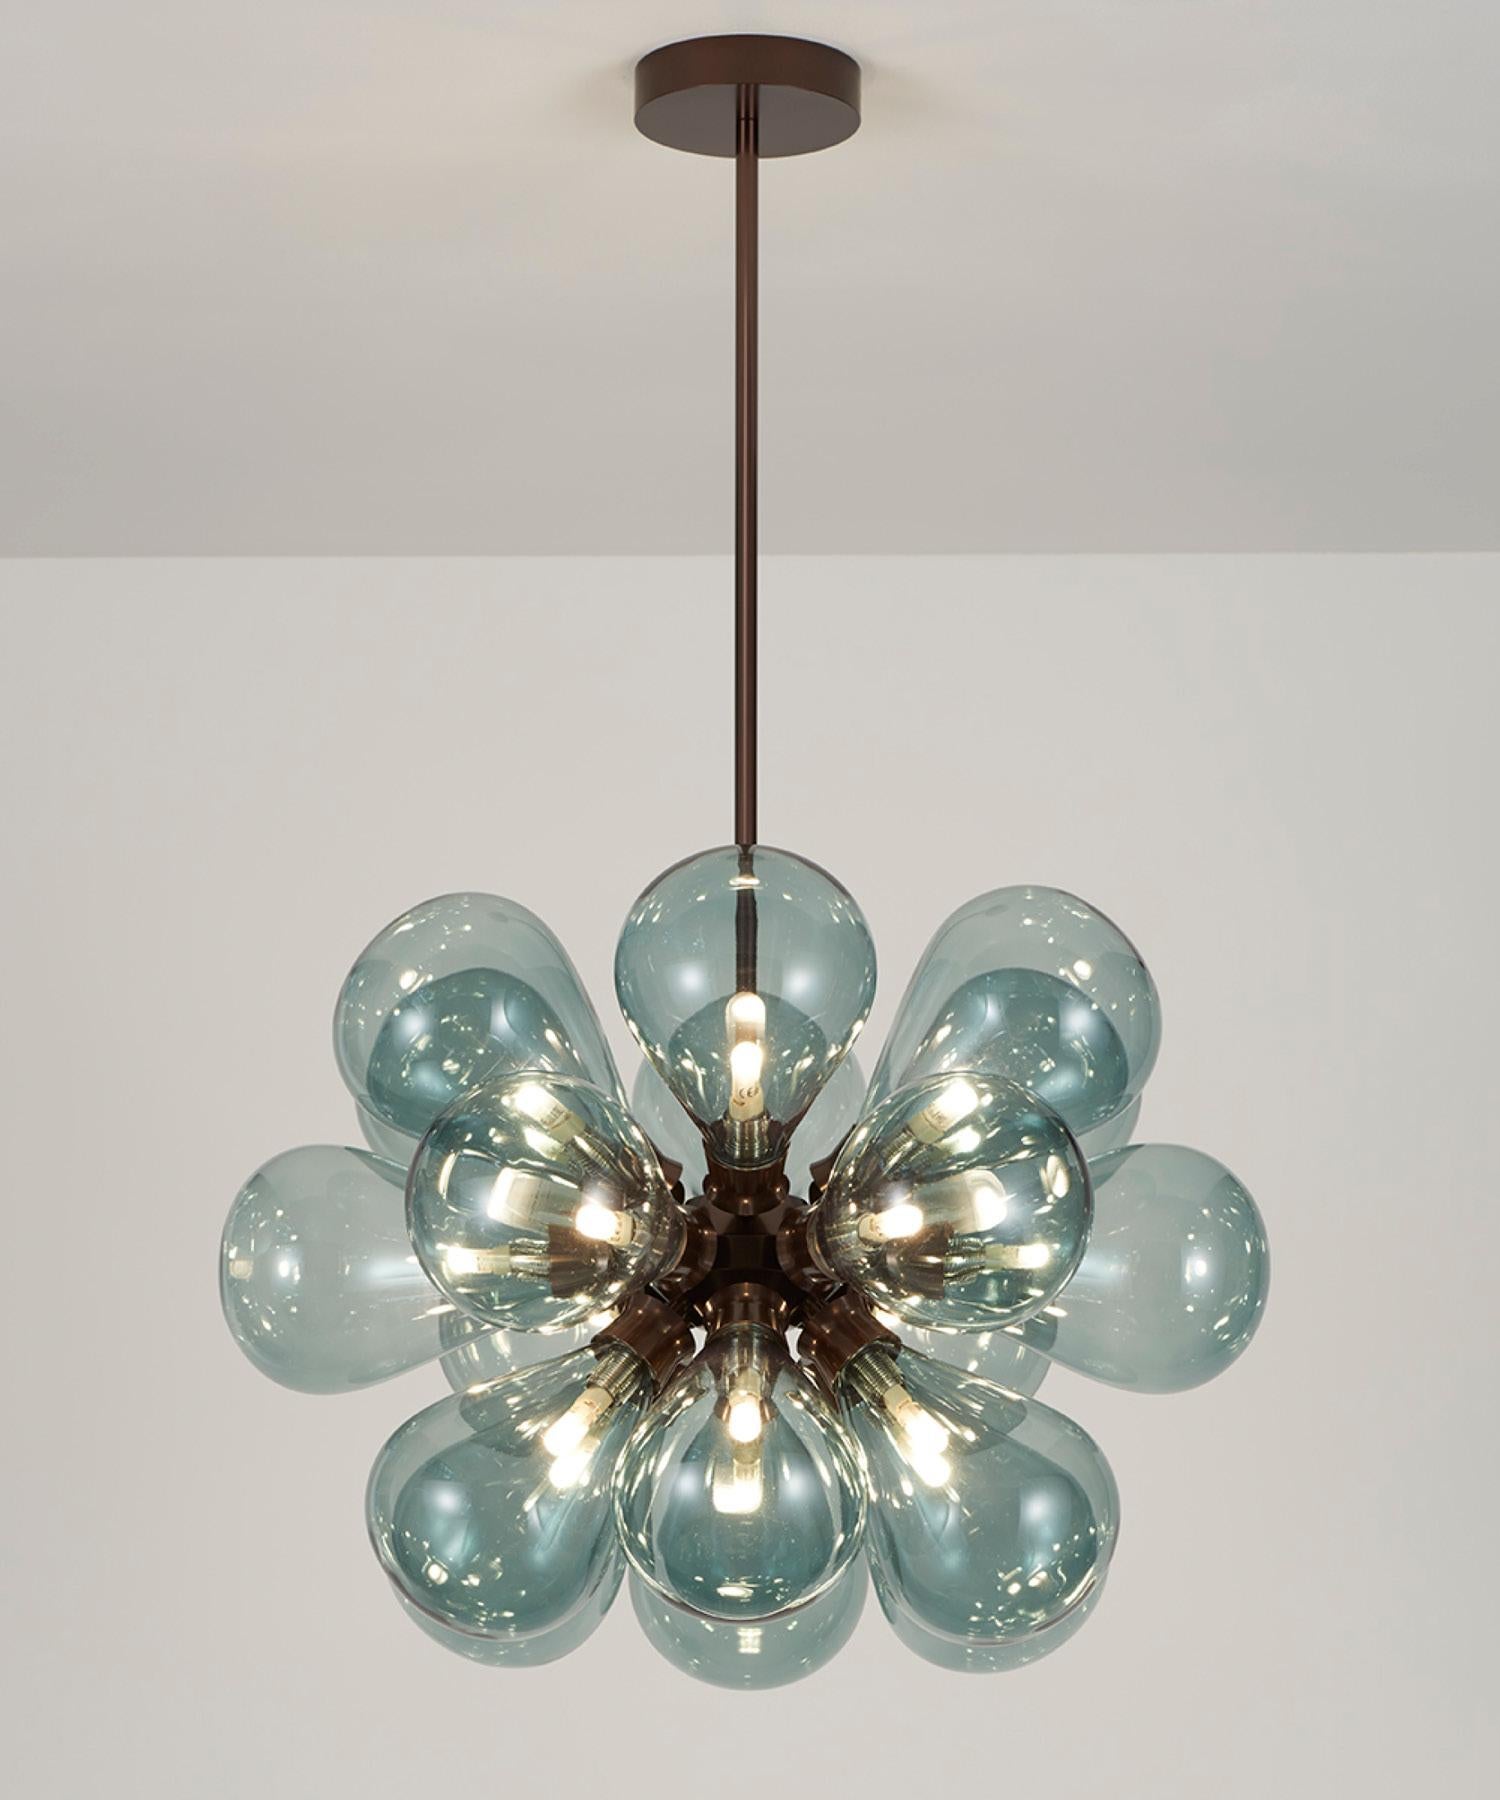 Anodized Cintola Maxi Pendant in Polished Aluminium with 18 Smoke Grey Handblown Globes For Sale